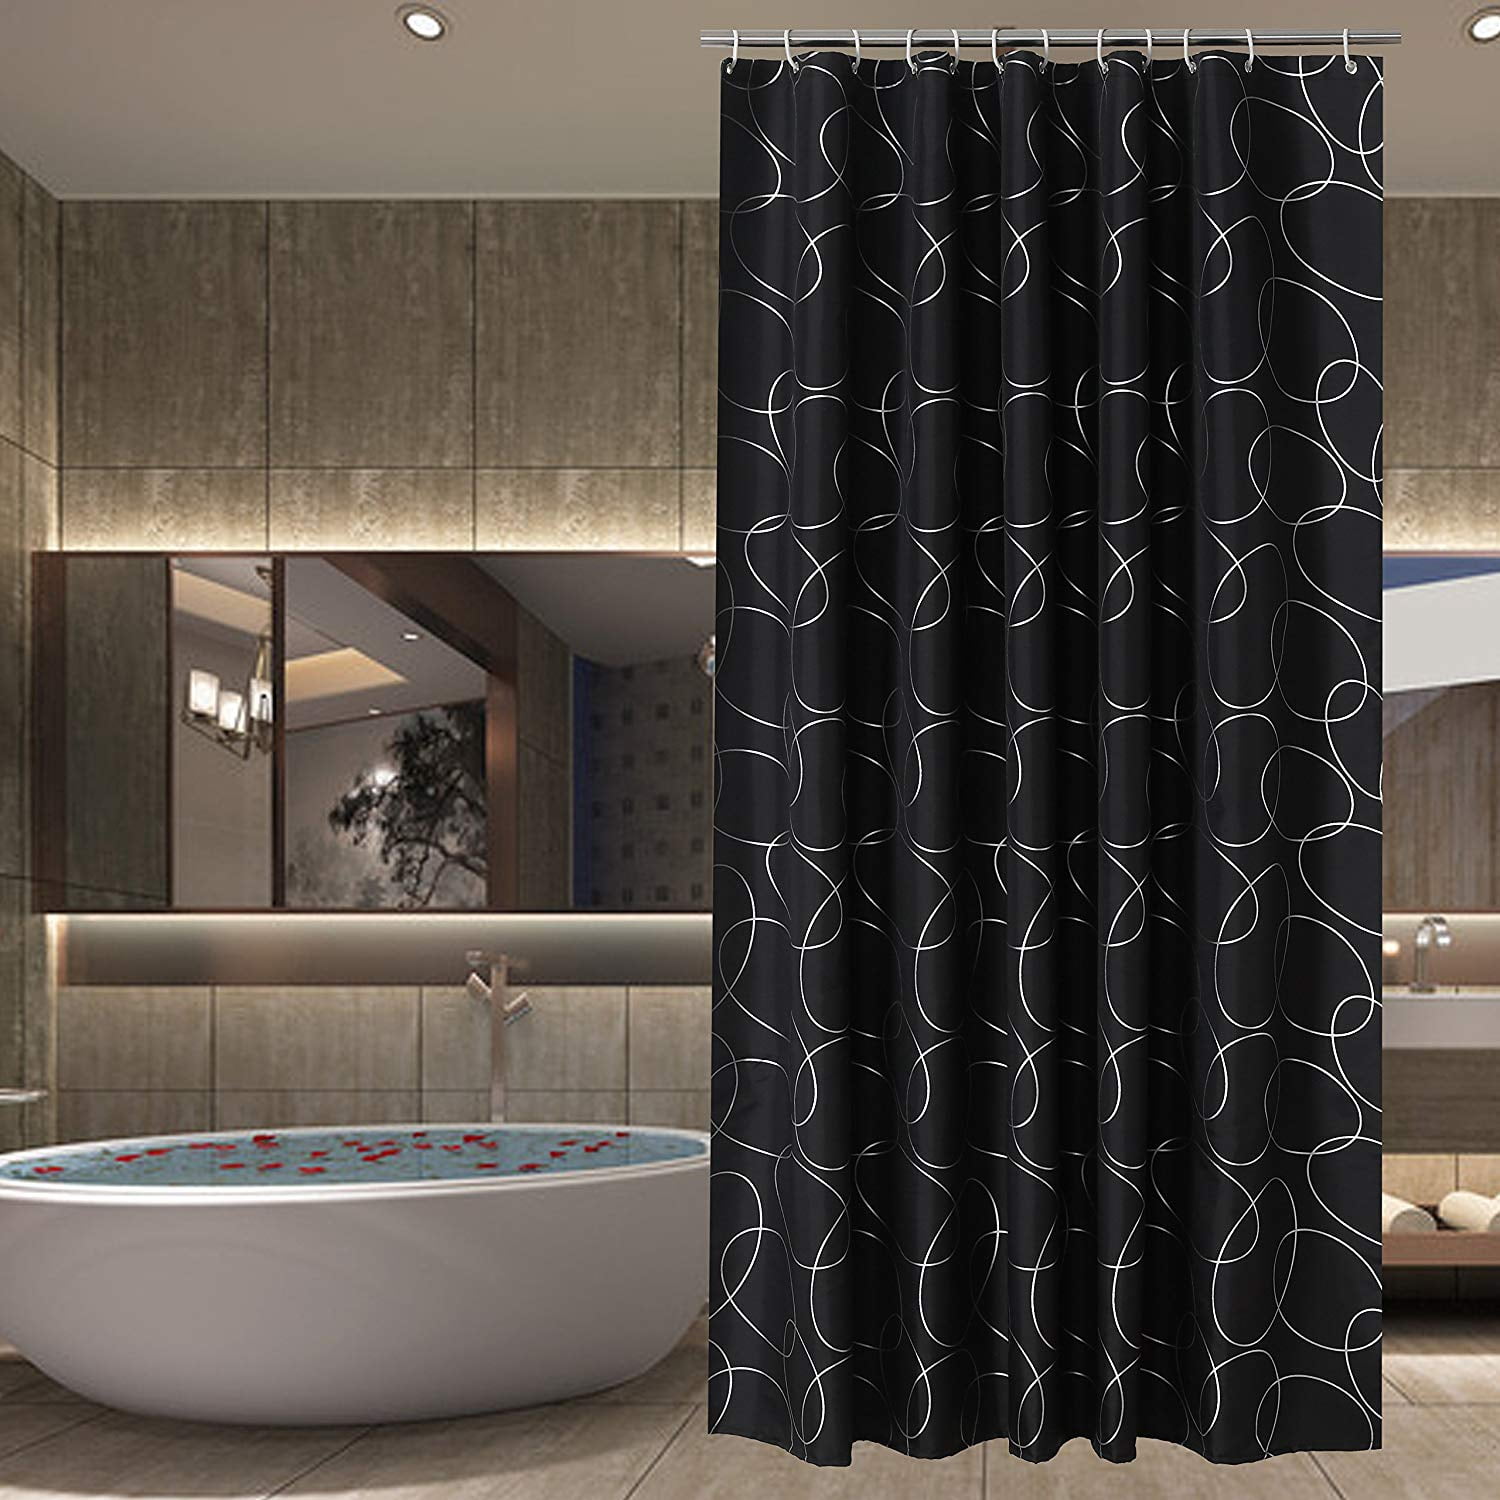 Sfoothome 180 x 200cm Fabric Shower Curtain Waterproof And Mildew Free Bath... 